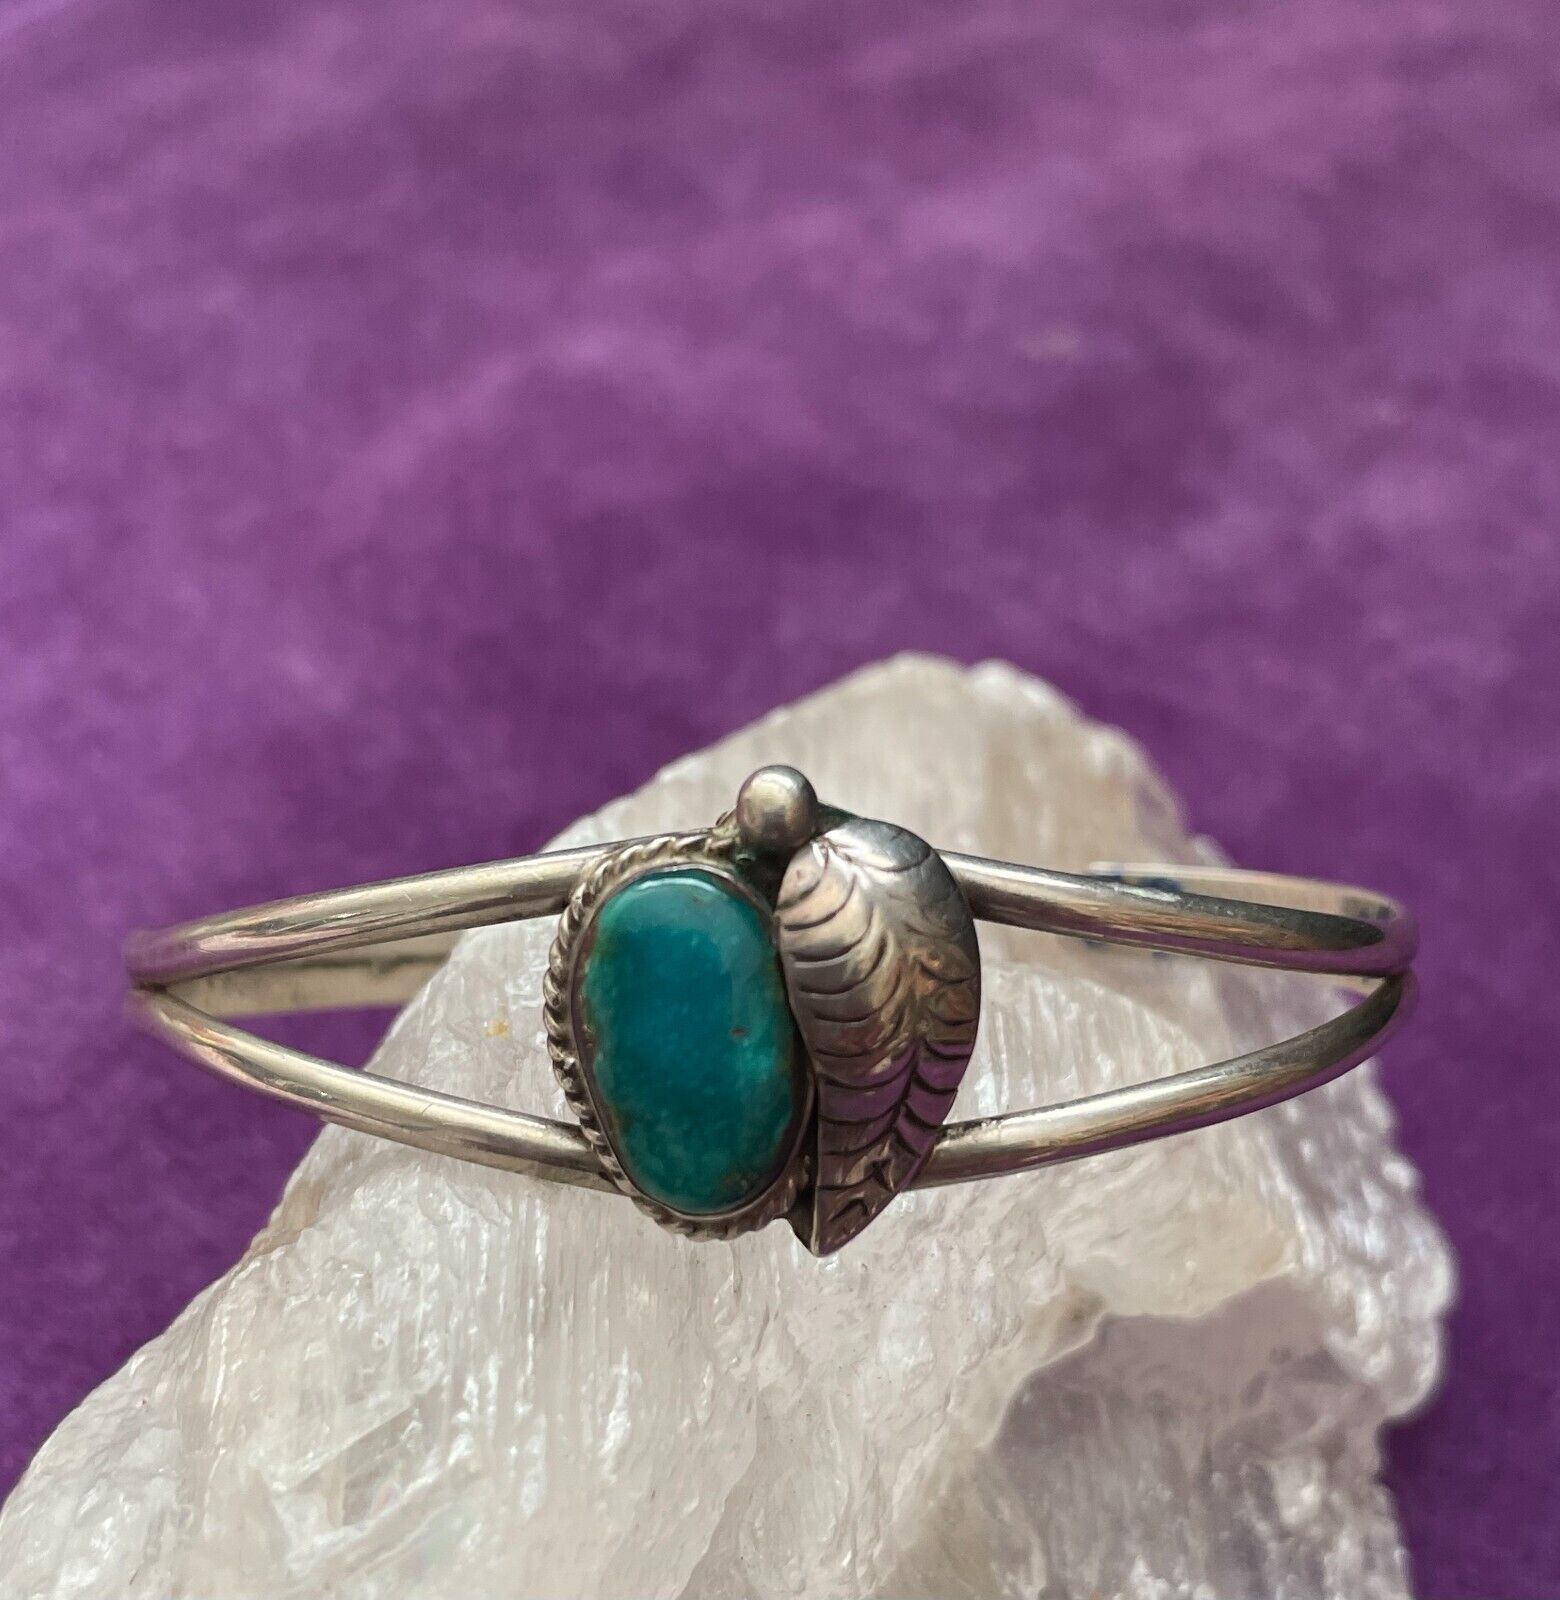 NAVAJO NATIVE AMERICAN TURQUOISE AND STERLING SILVER VINTAGE CUFF BRACELET